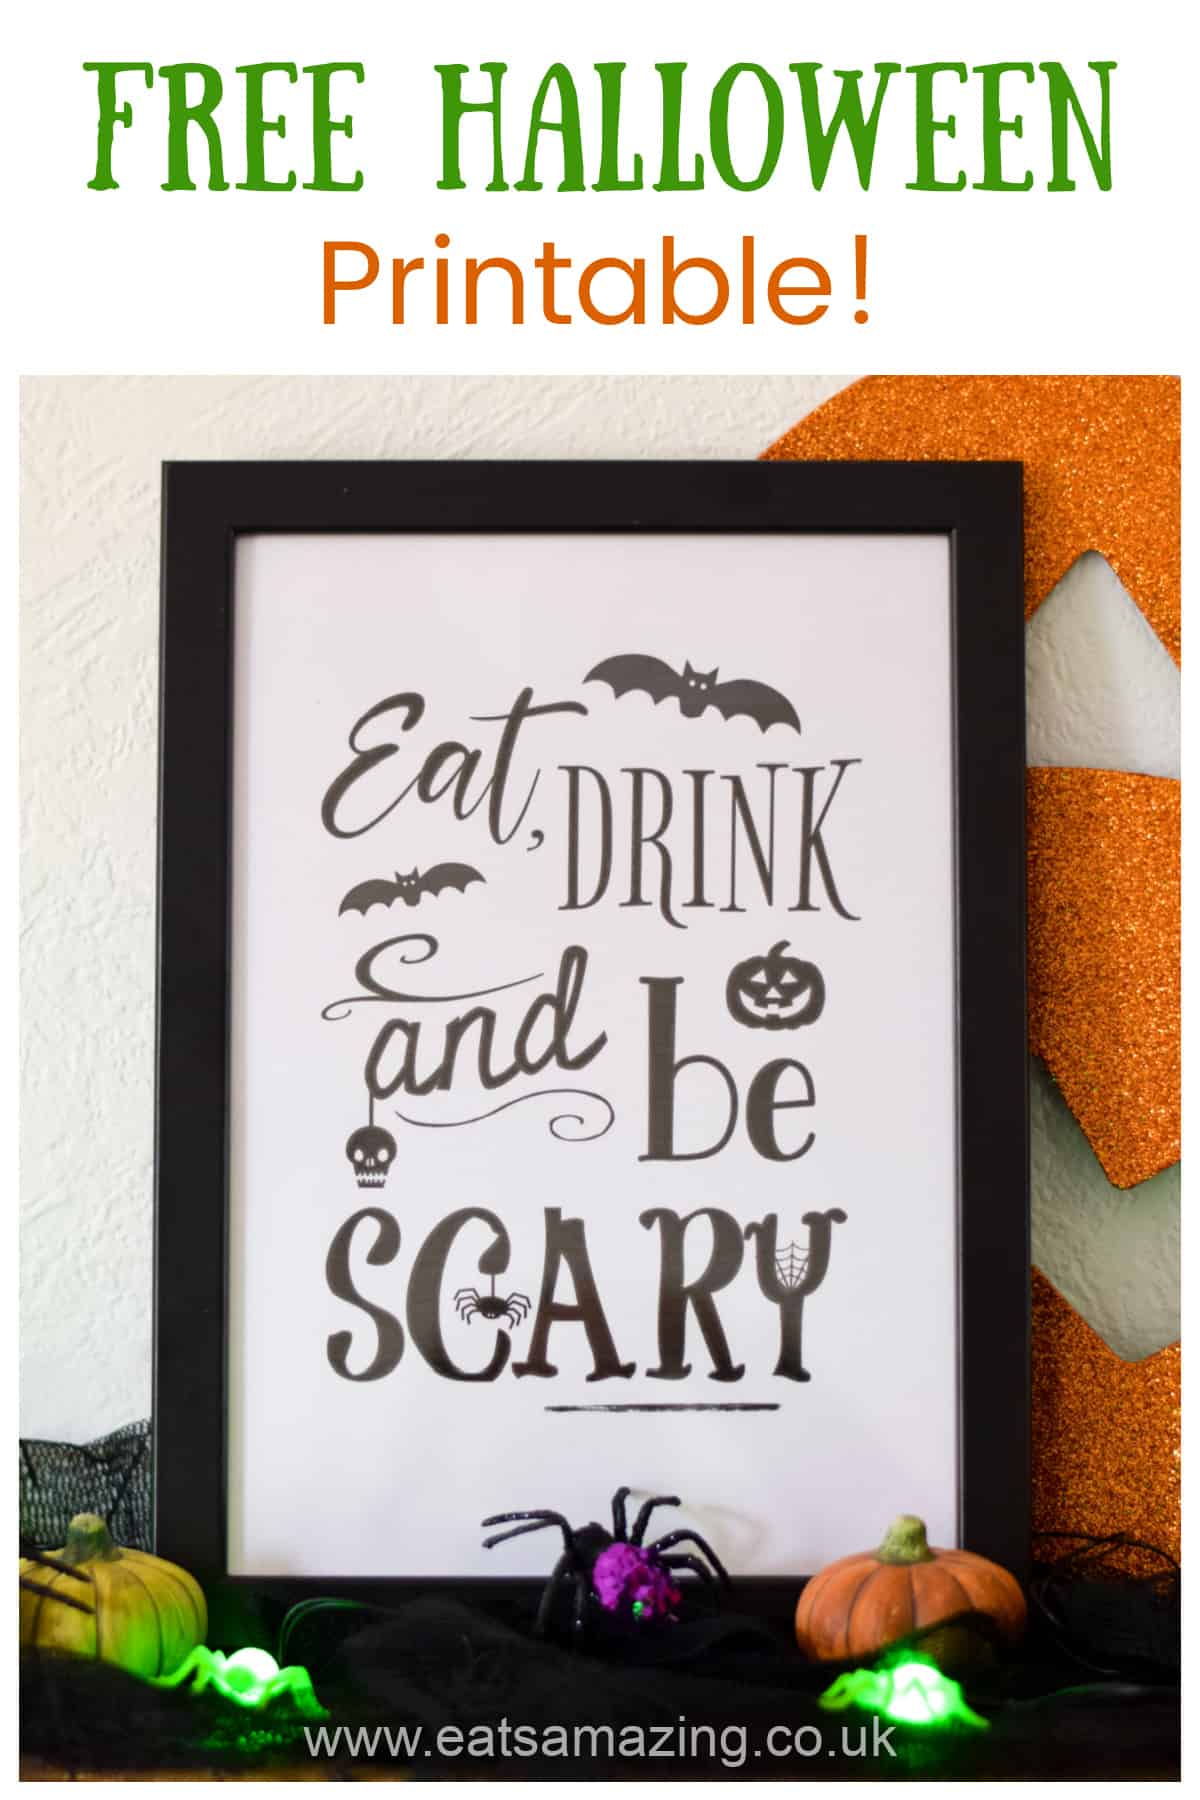 FREE Halloween print to download with fun Halloween quote - Eat Drink and Be Scary